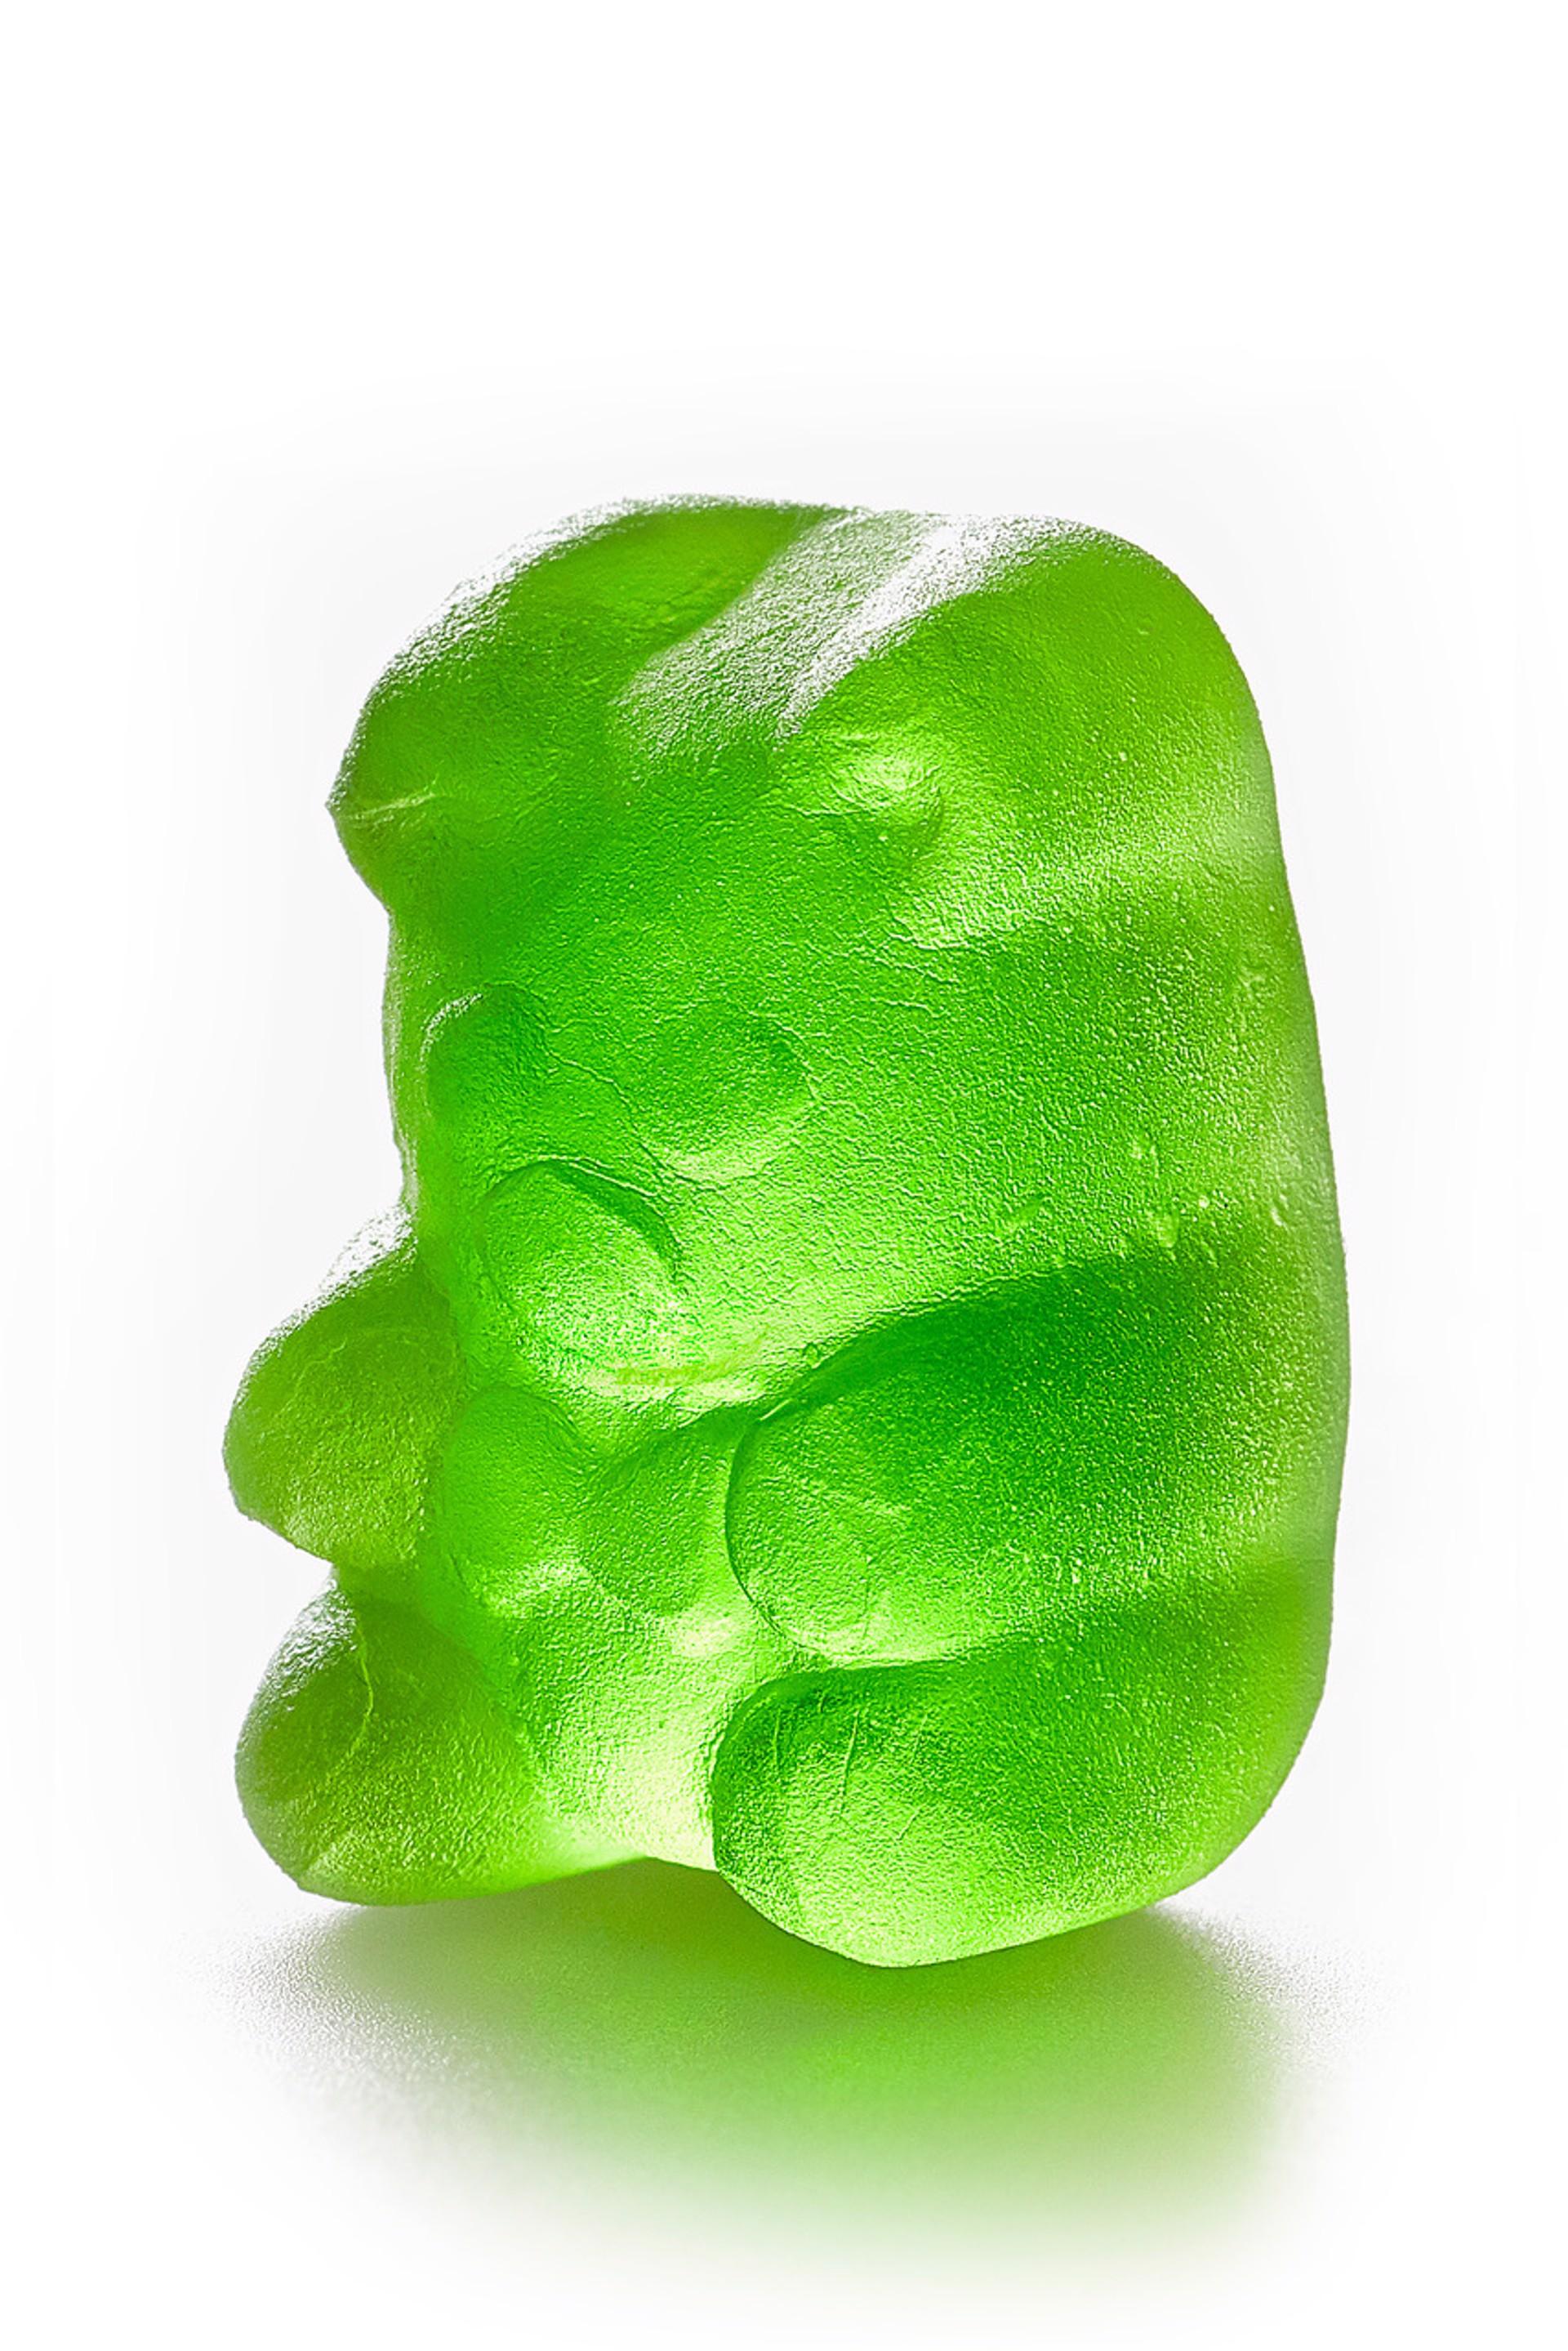 Gummy Bear Green
Digital C-Print / Archival Pigment Print
Edition of 5 per size
Available sizes:
24 x 18 in
36 x 24 in
48 x 36 in

Refine Sugar Collection.

This photograph will be printed once payment has been received and will ship directly from